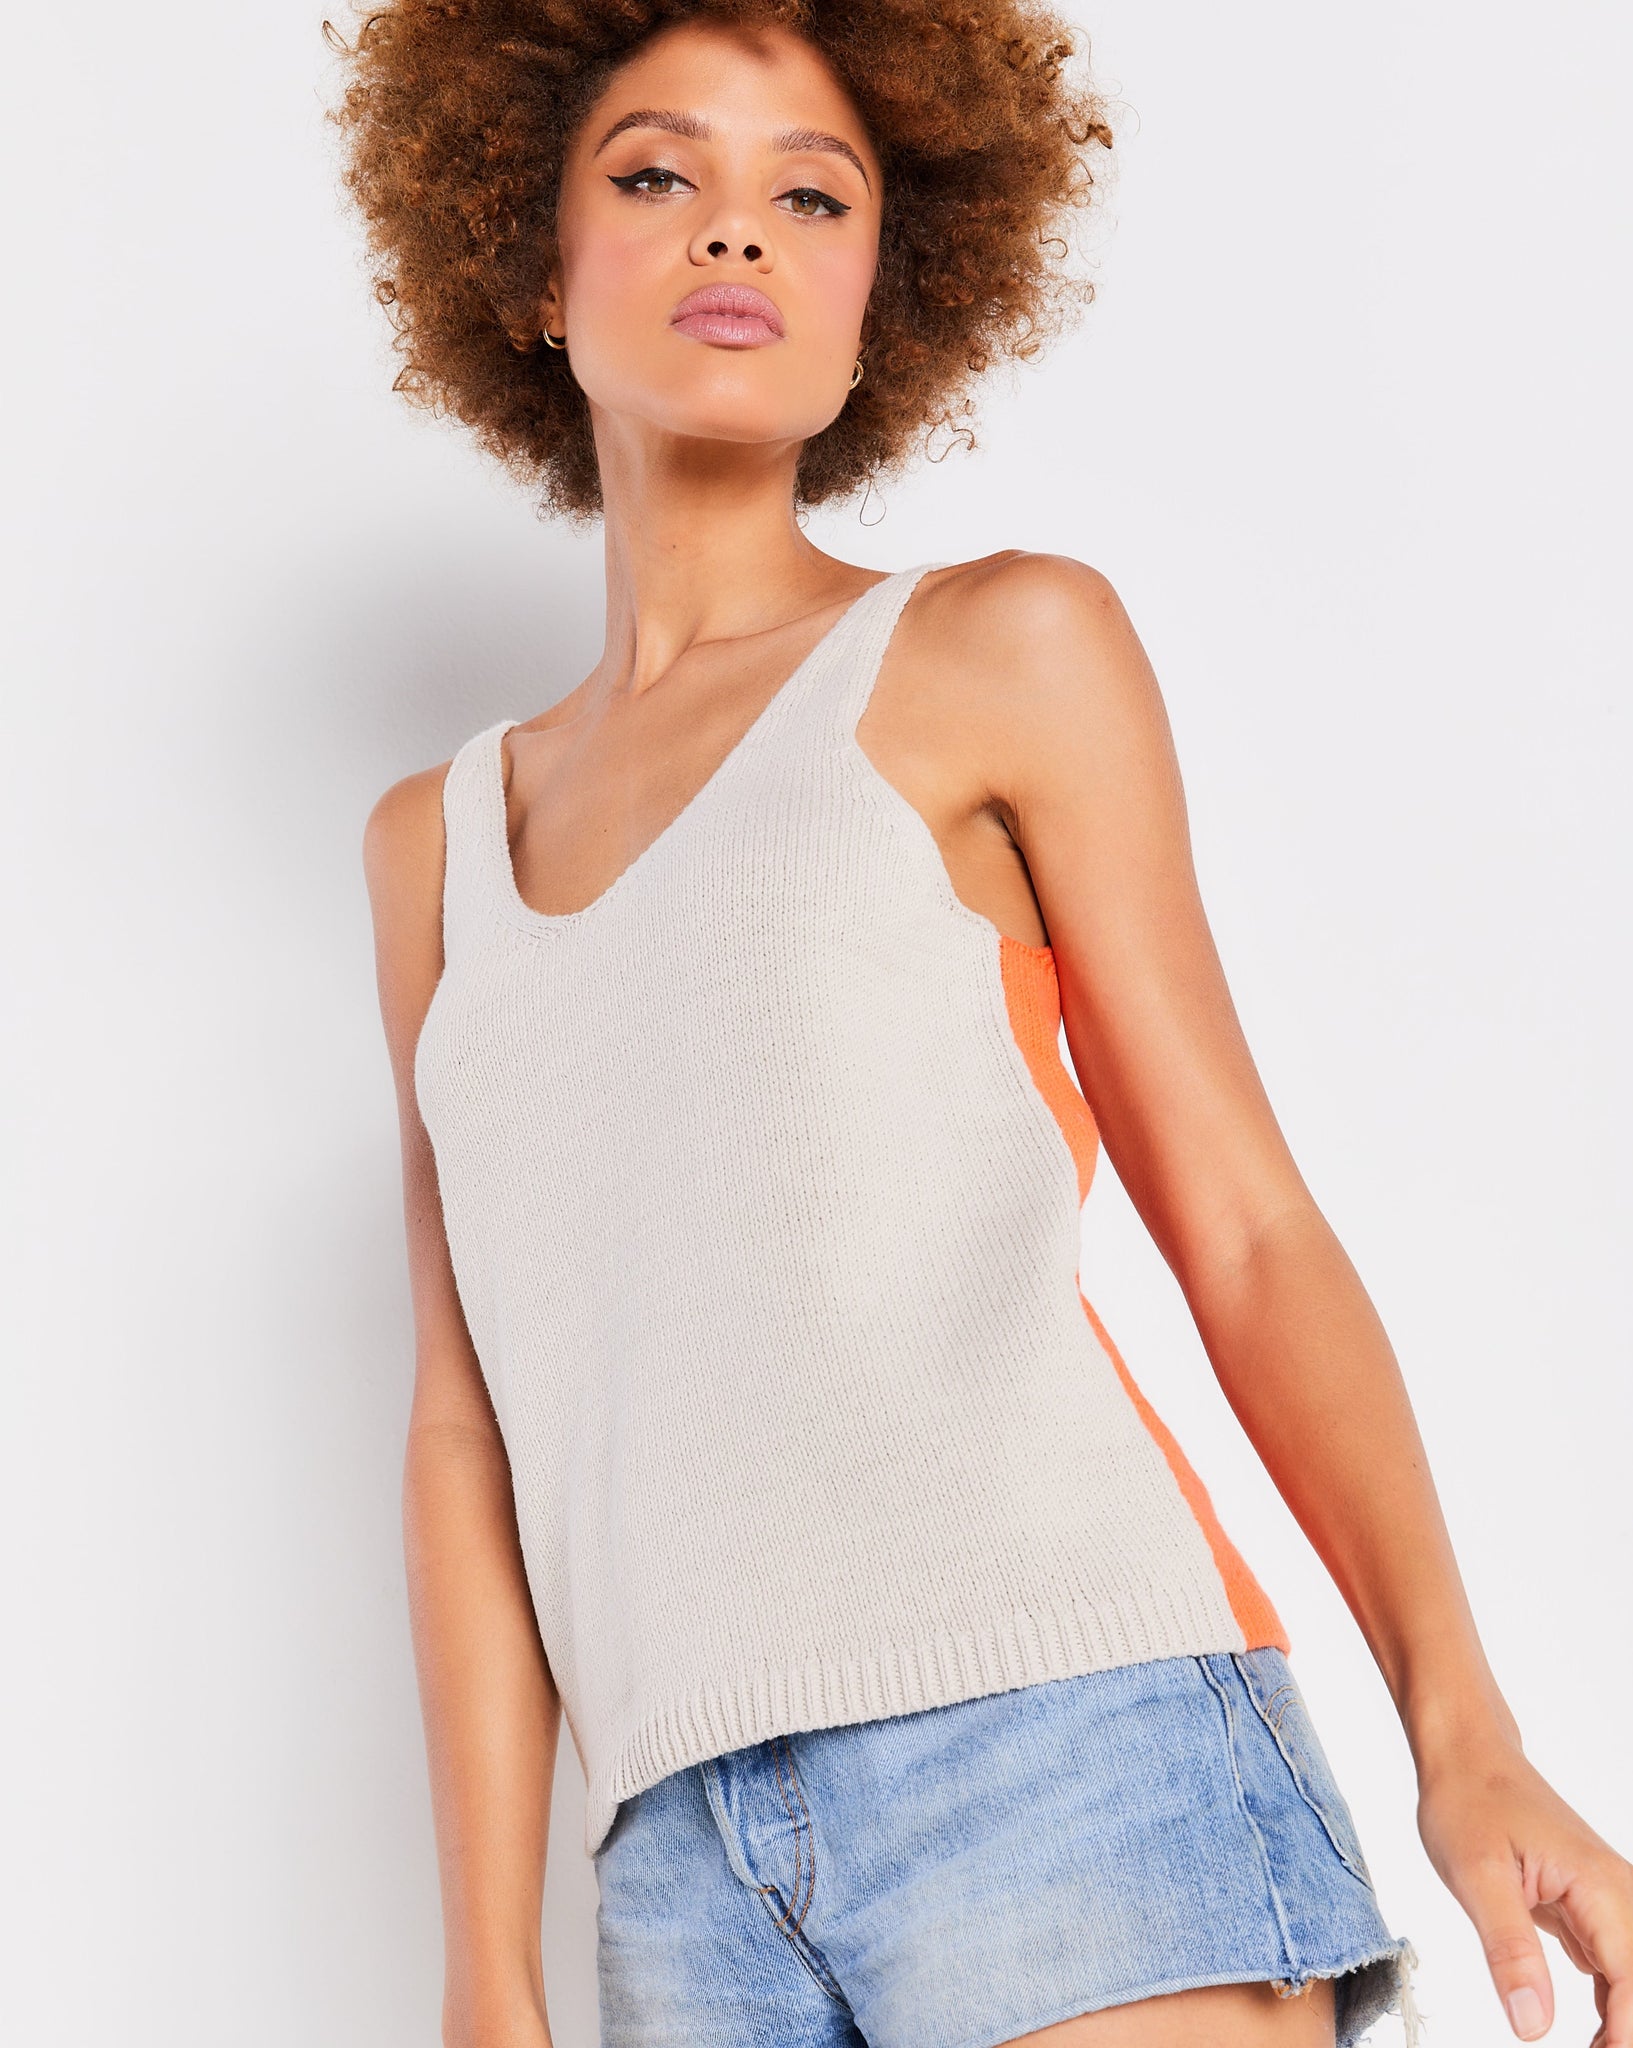 Sand and orange knit tank by Lisa Todd.